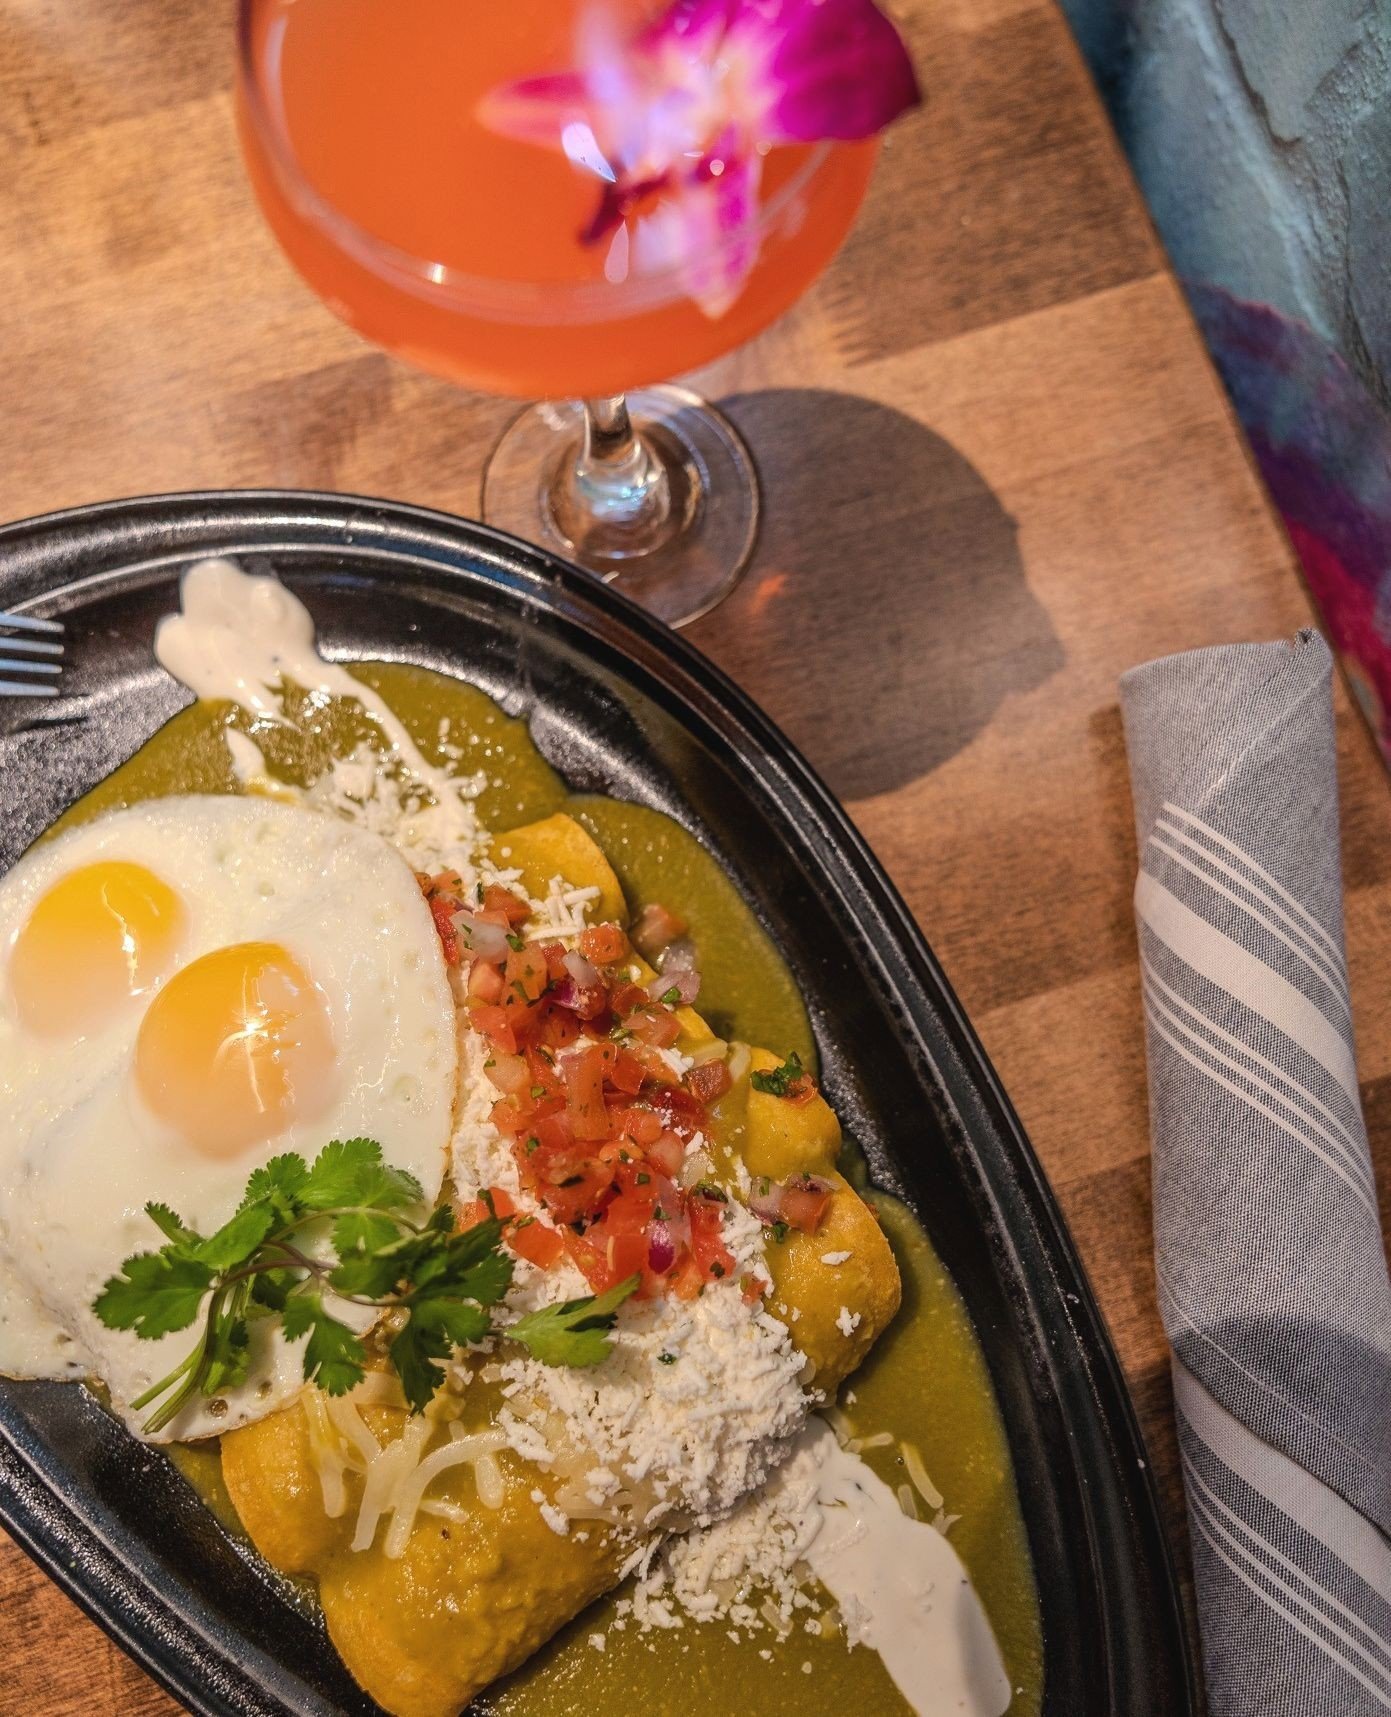 MAMA'S WE LOVE YOU &amp; IT'S ALMOST YOUR SPECIAL DAY ✨️⁠
⁠
Come celebrate it with us and our delicious, specialty brunch menu... alllll weekend long from the 10th-12th cause we love you 🫶⁠
⁠
Pictured is our yummy Longaniza &amp; Potato Enchiladas, 